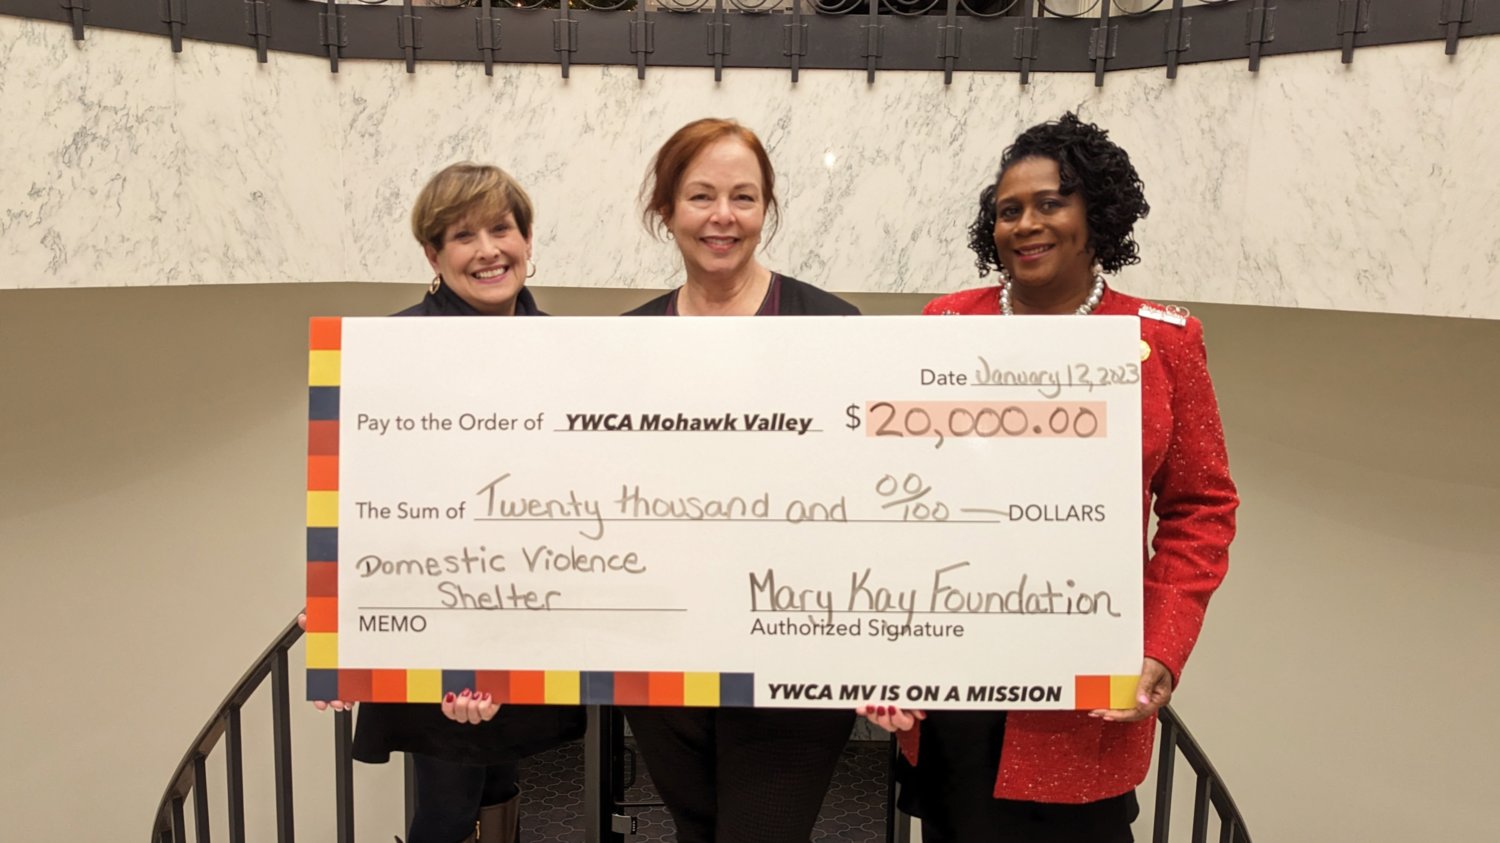 The YWCA Mohawk Valley was awarded a $20,000 grant from the Mary Kay Ash Foundation to benefit the agency’s domestic violence shelters. From left: Mary Reina, independent beauty consultant and MKAF ambassador; Dianne Stancato, YWCA MV CEO; and Donna Marie Lambert, independent beauty consultant.